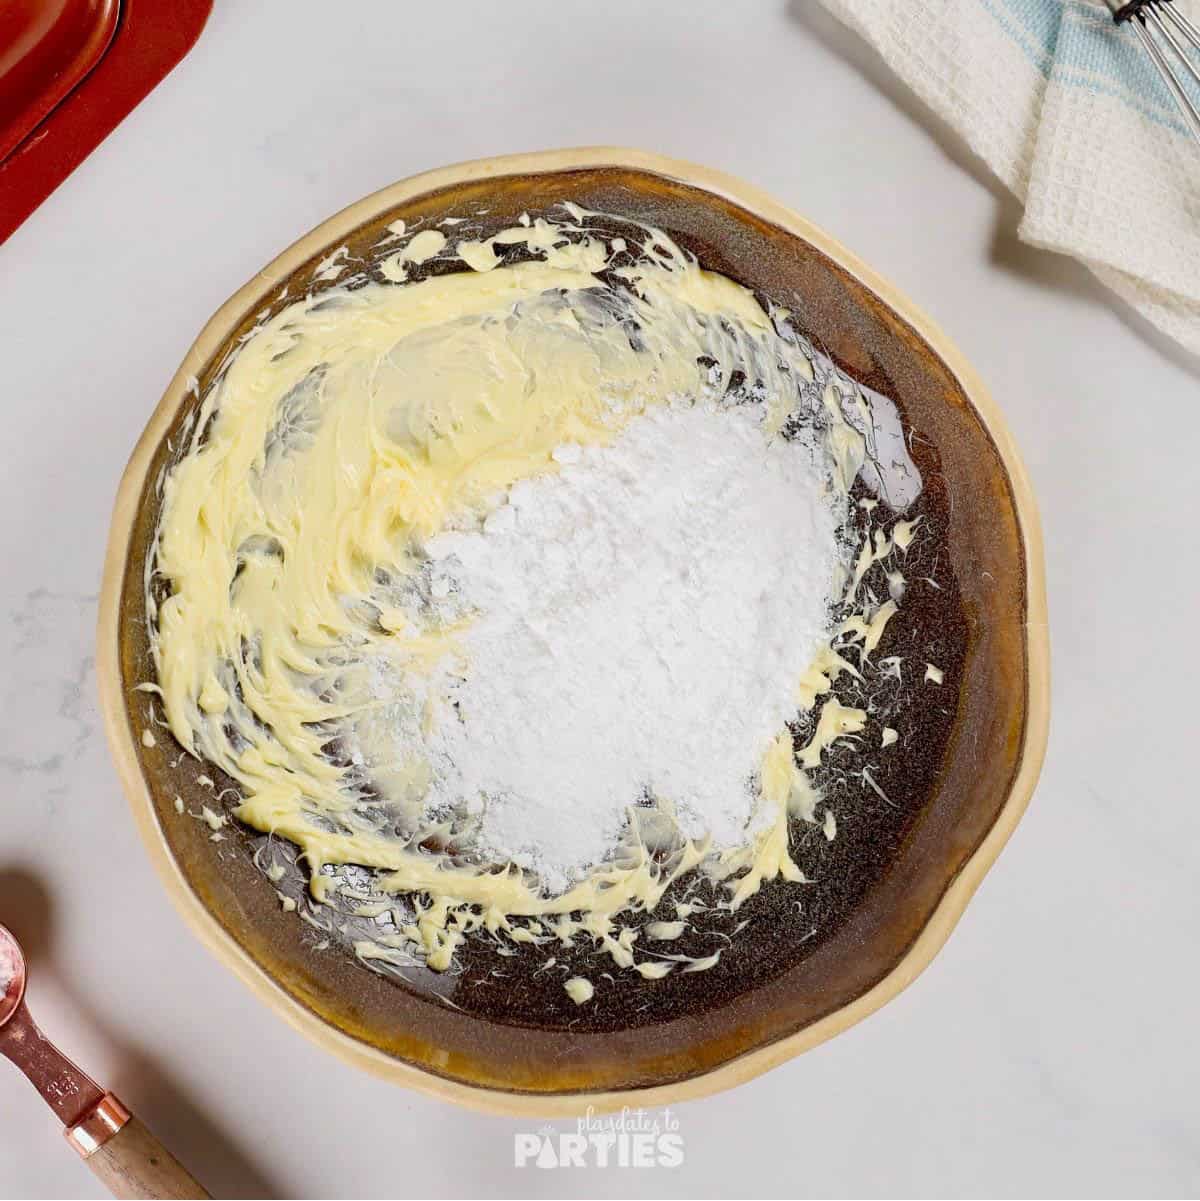 Creamed butter with powdered sugar on top.